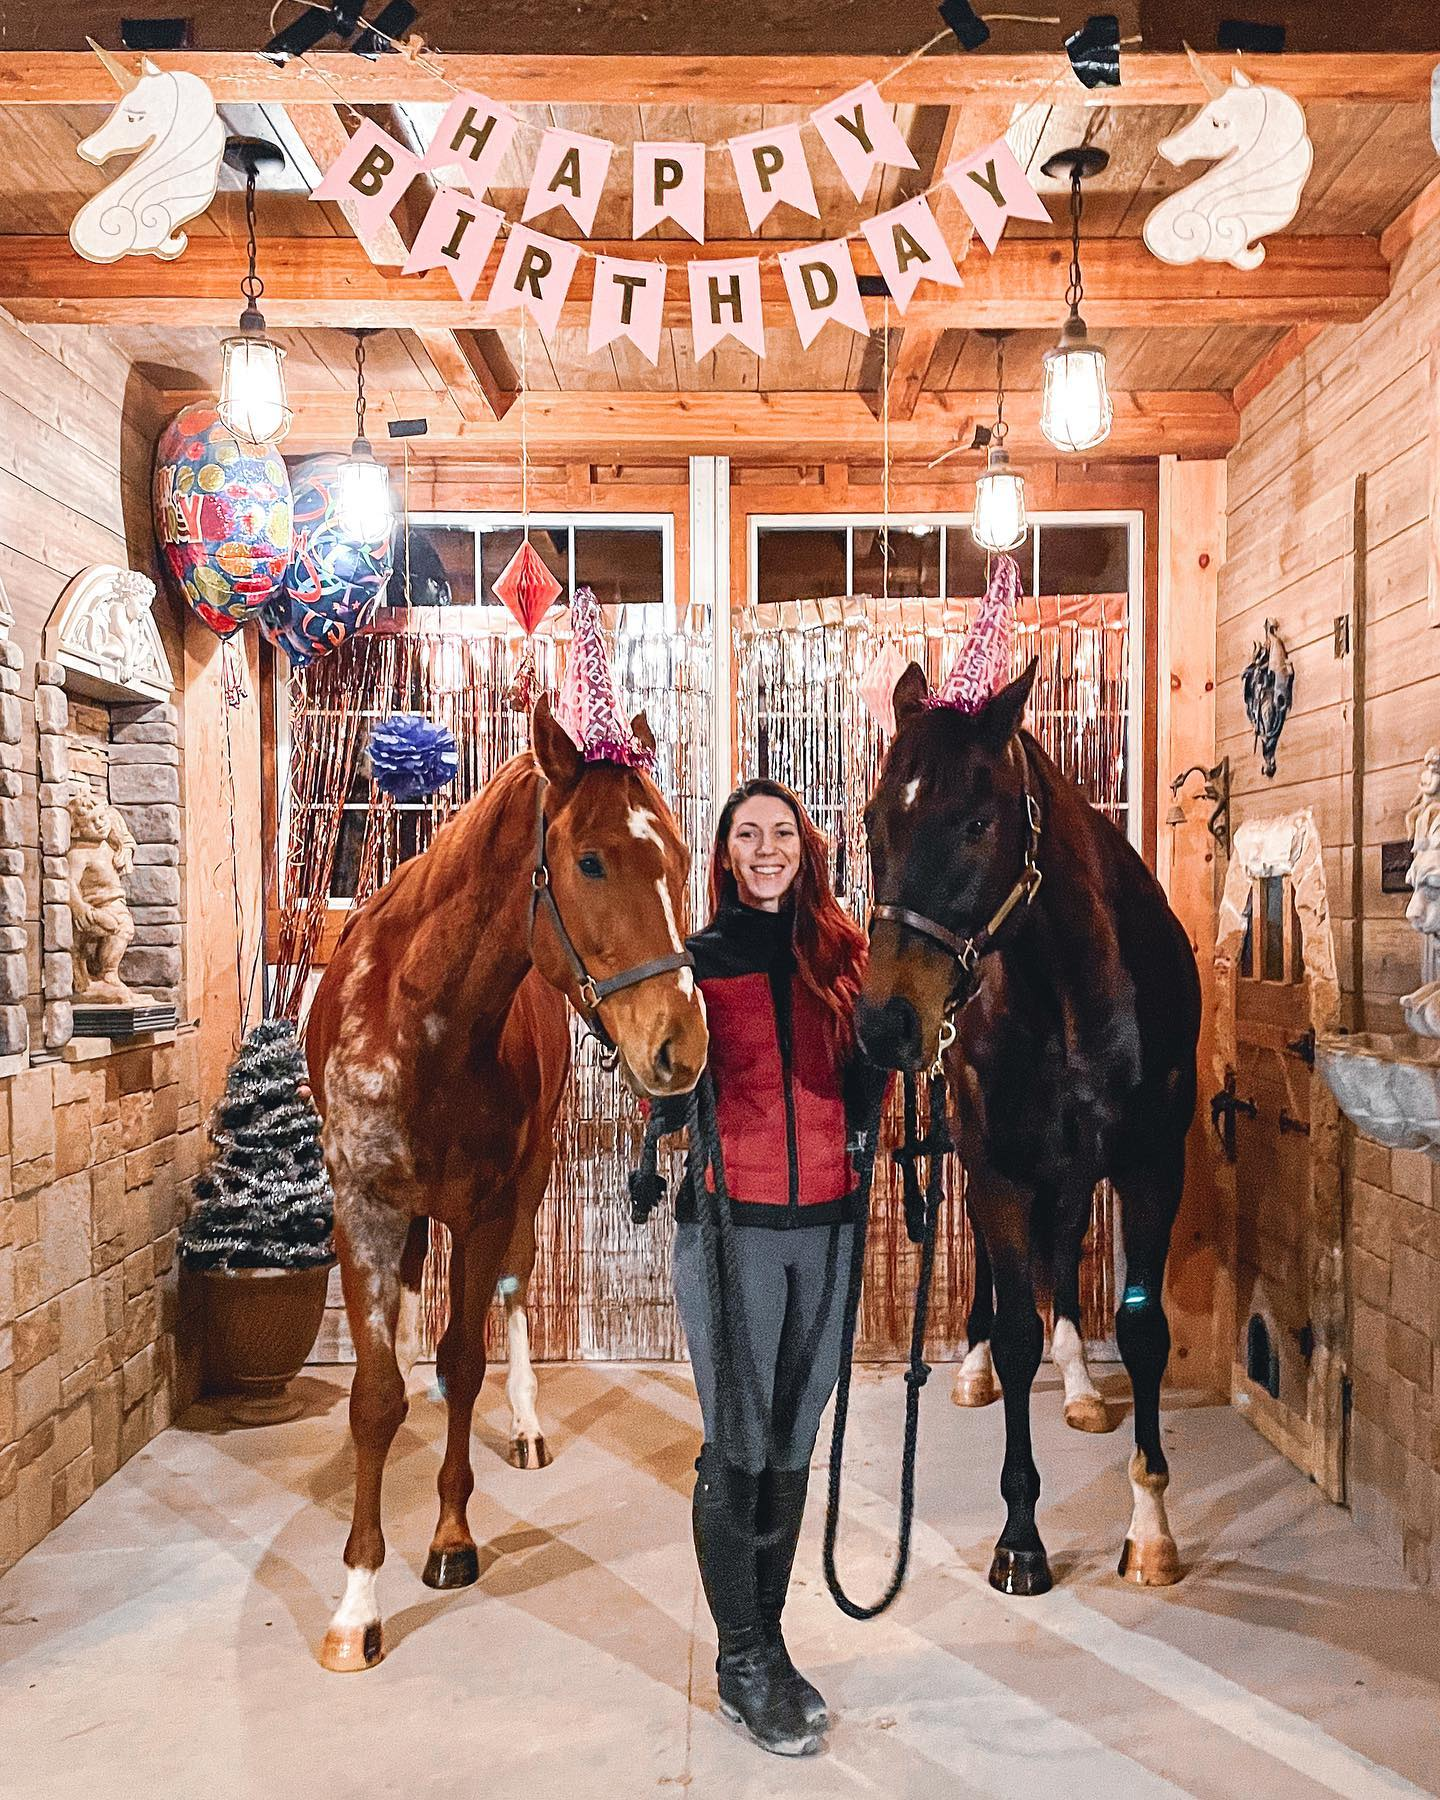 Jessica Darby Birthday photo with a chestnut horse and dark bay horse with birthday hats on